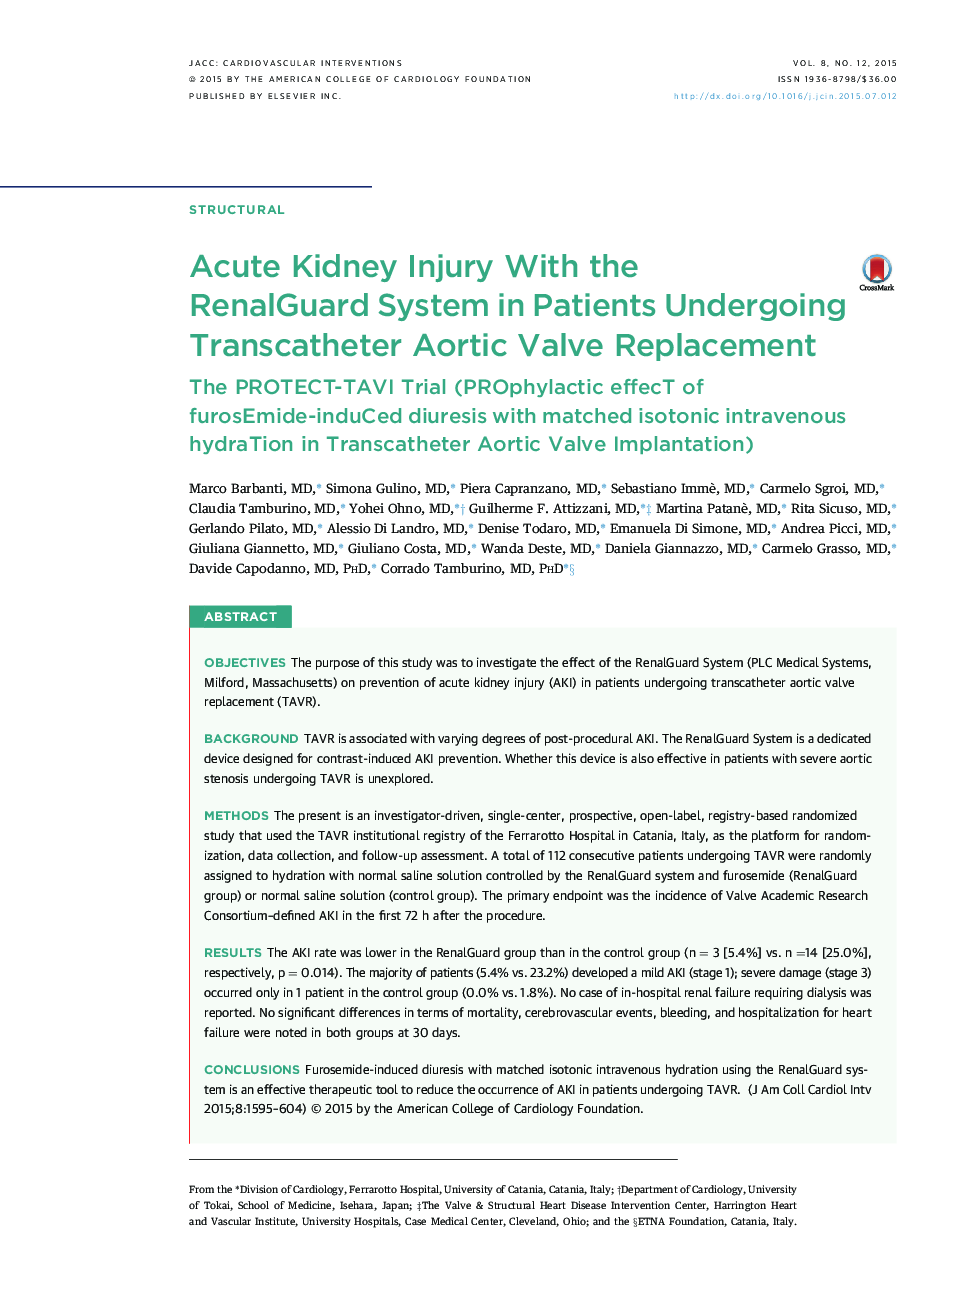 Acute Kidney Injury With the RenalGuard System in Patients Undergoing Transcatheter Aortic Valve Replacement : The PROTECT-TAVI Trial (PROphylactic effecT of furosEmide-induCed diuresis with matched isotonic intravenous hydraTion in Transcatheter Aortic V